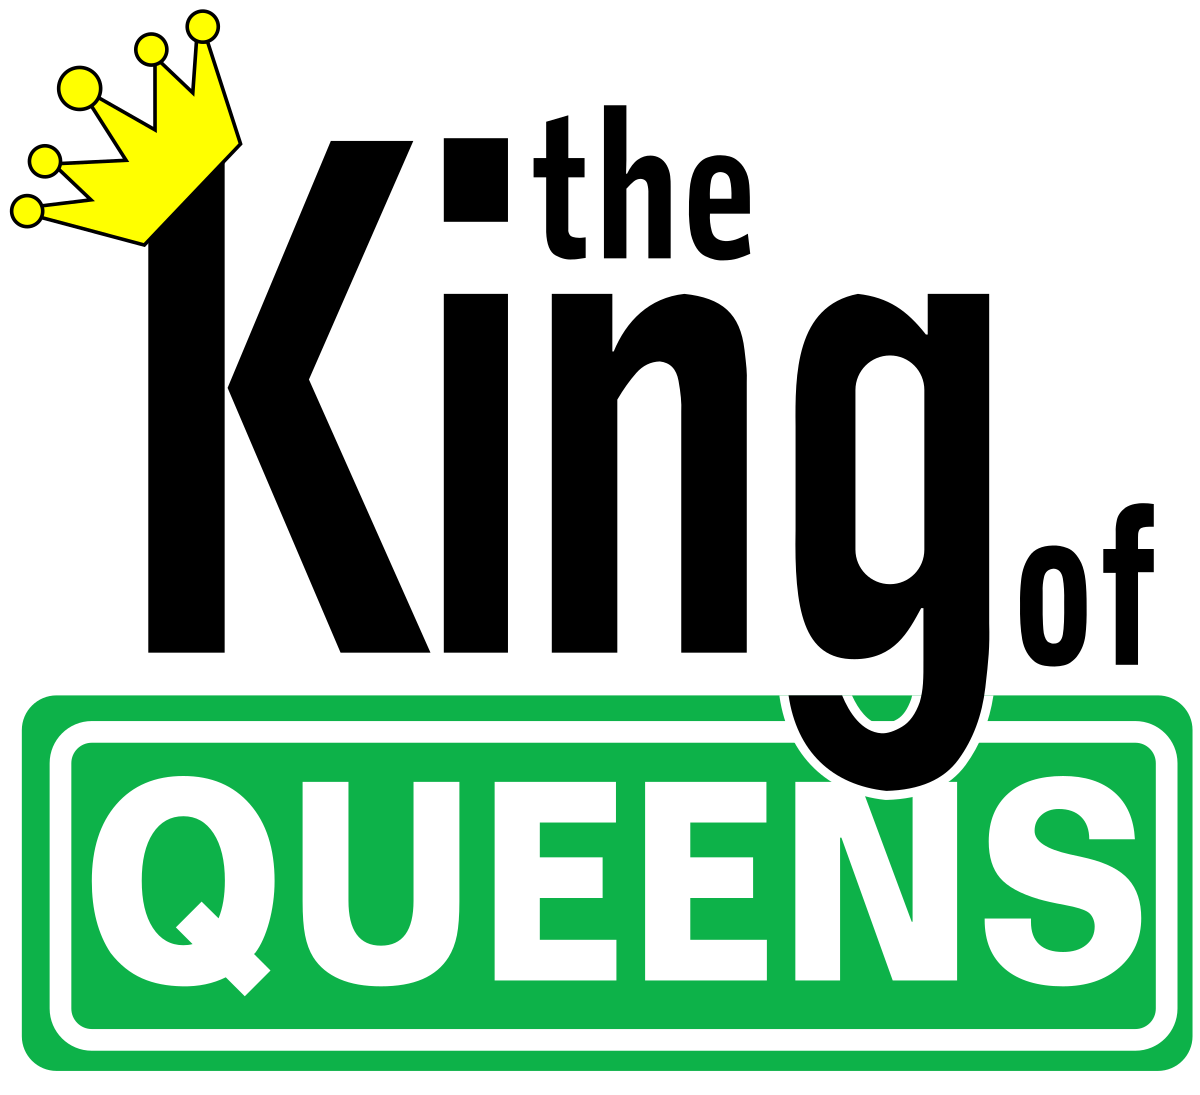 King of Queens/Episodenliste – Wikipedia